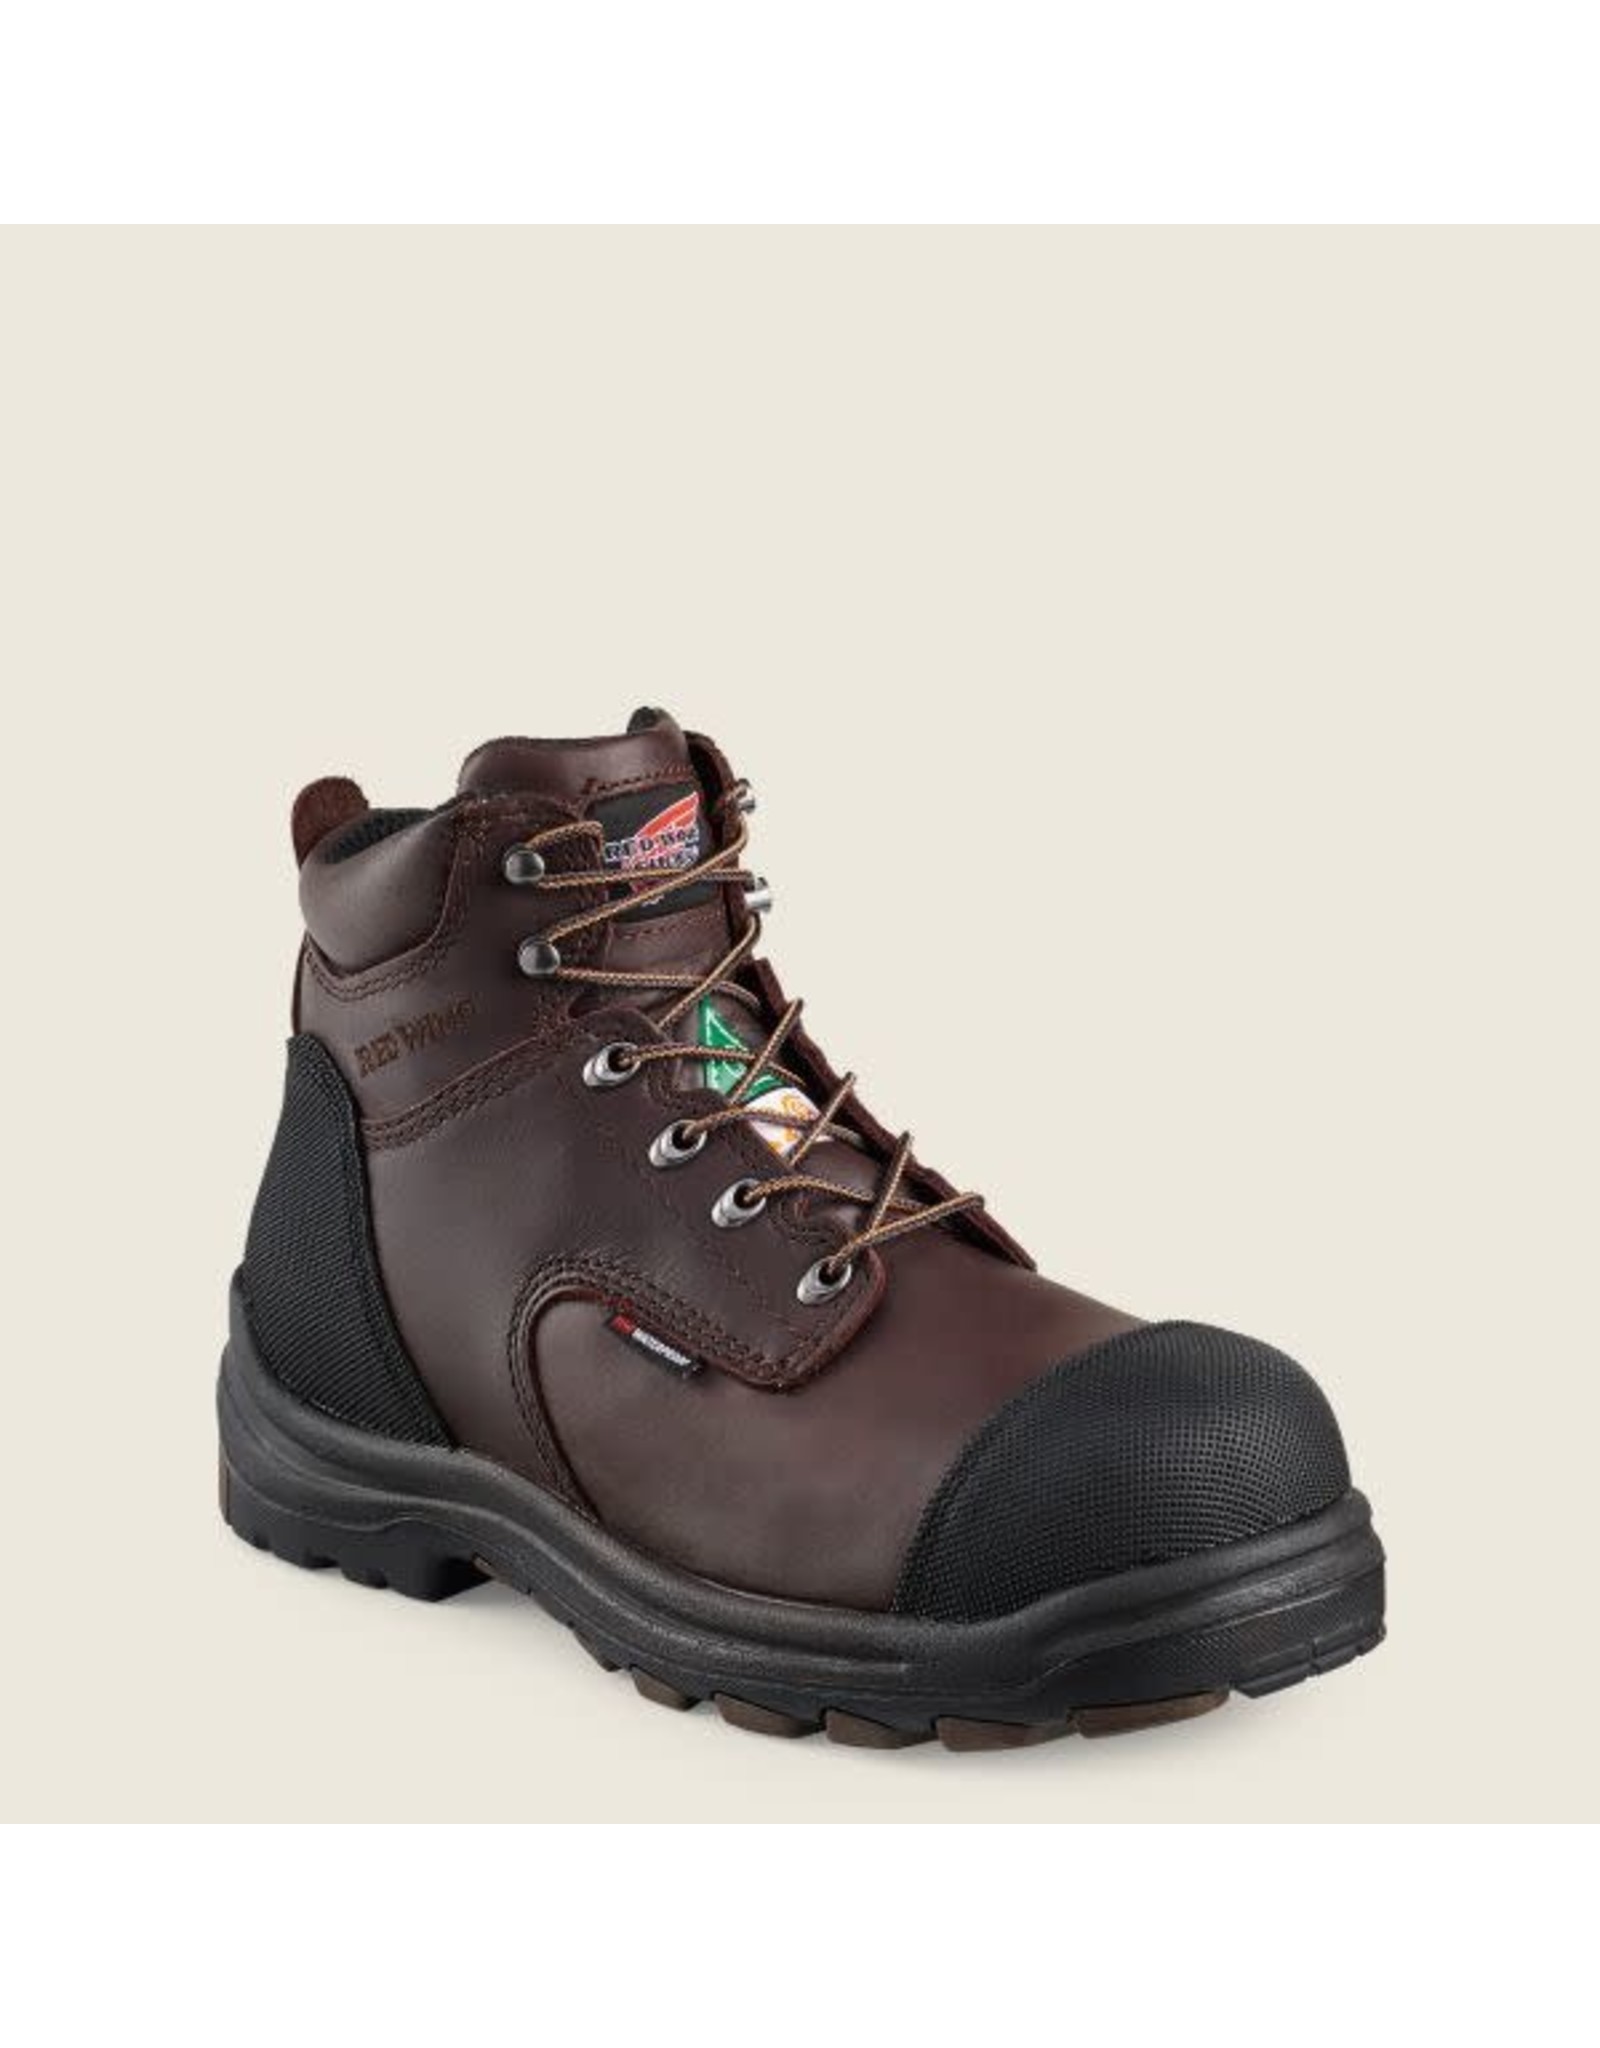 Red Wing Men's Red Wing King Toe 6" CSA